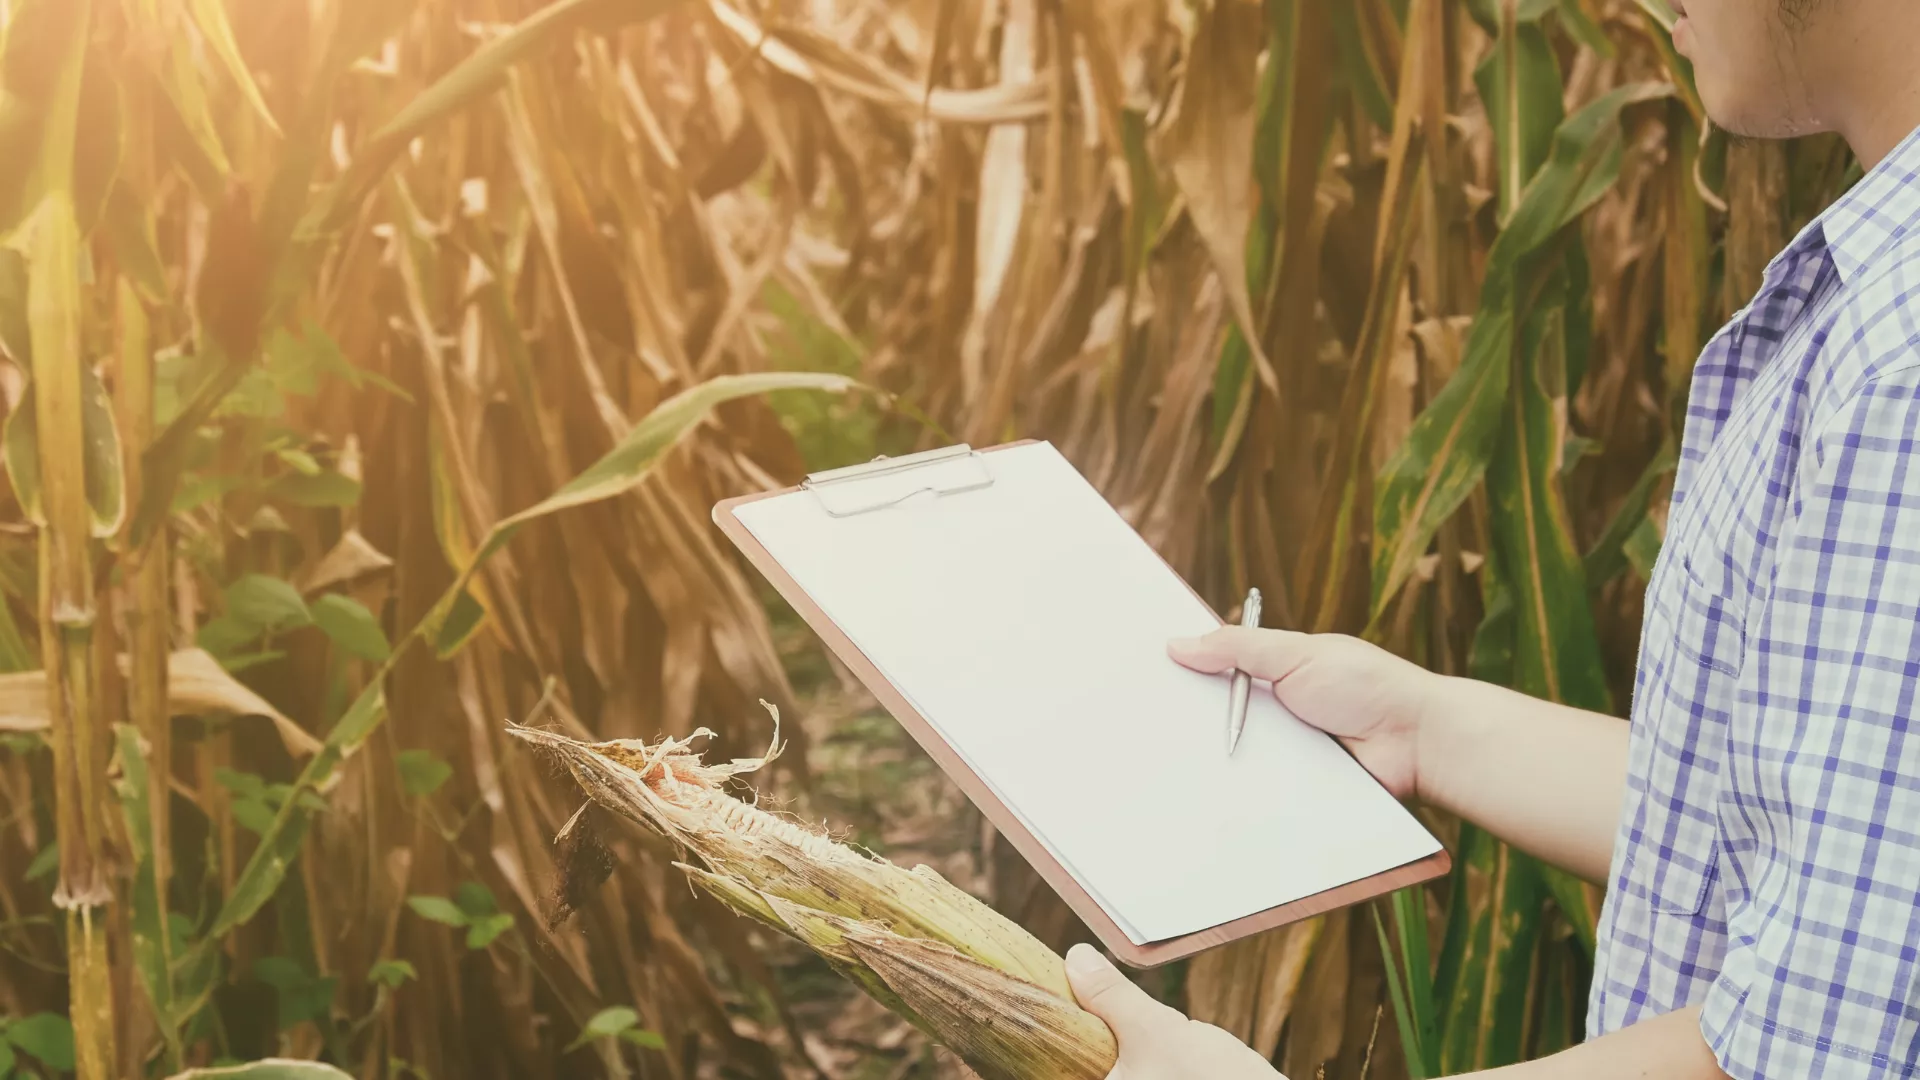 Researcher in cornfield collecting data